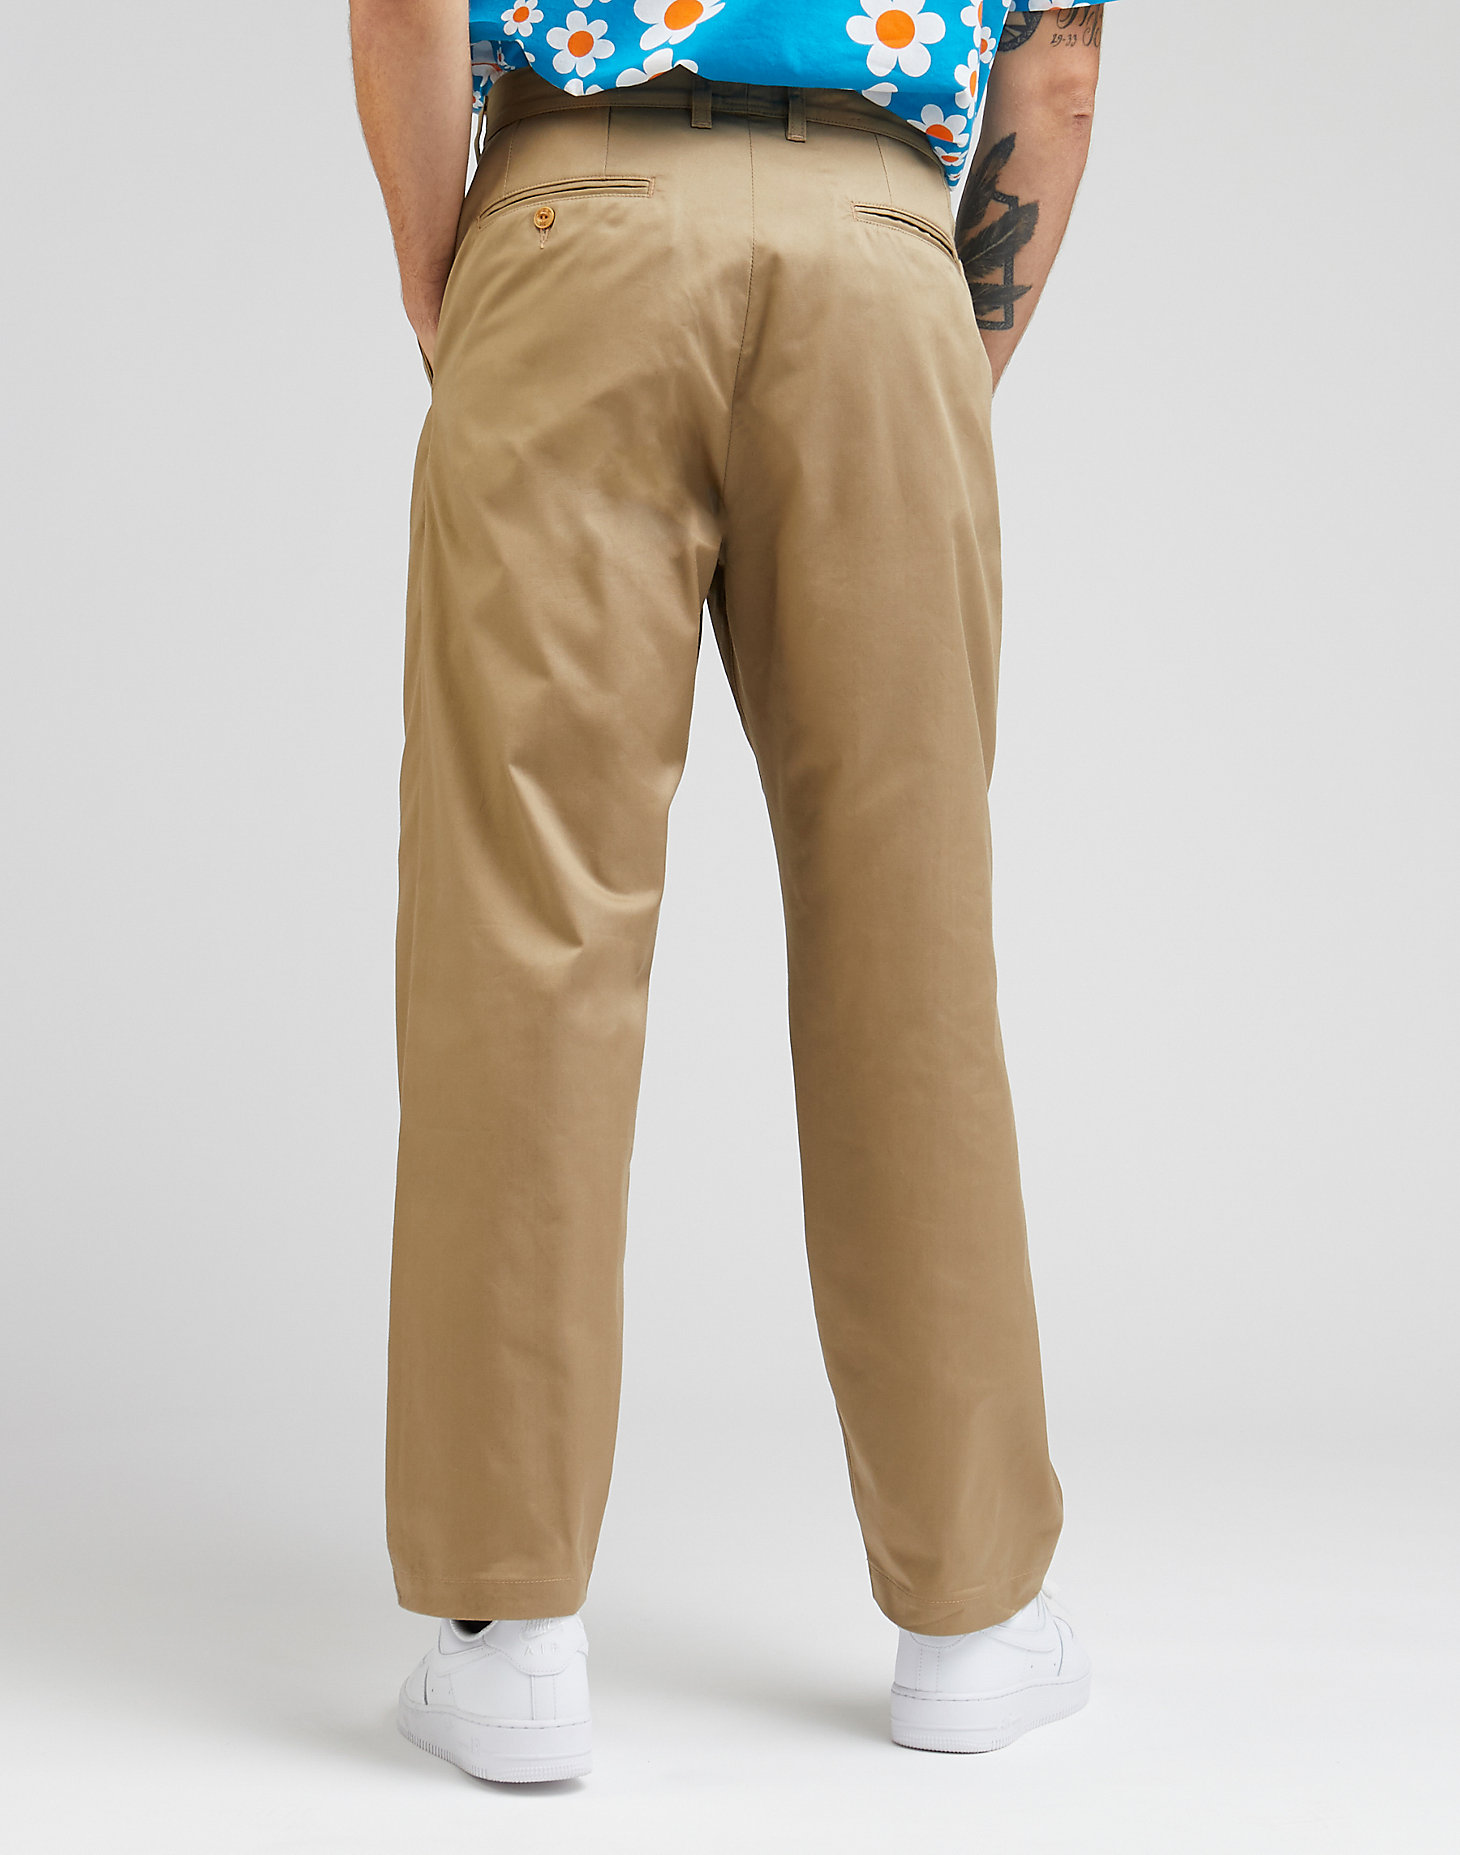 Double Pleated Chino in Dry alternative view 1